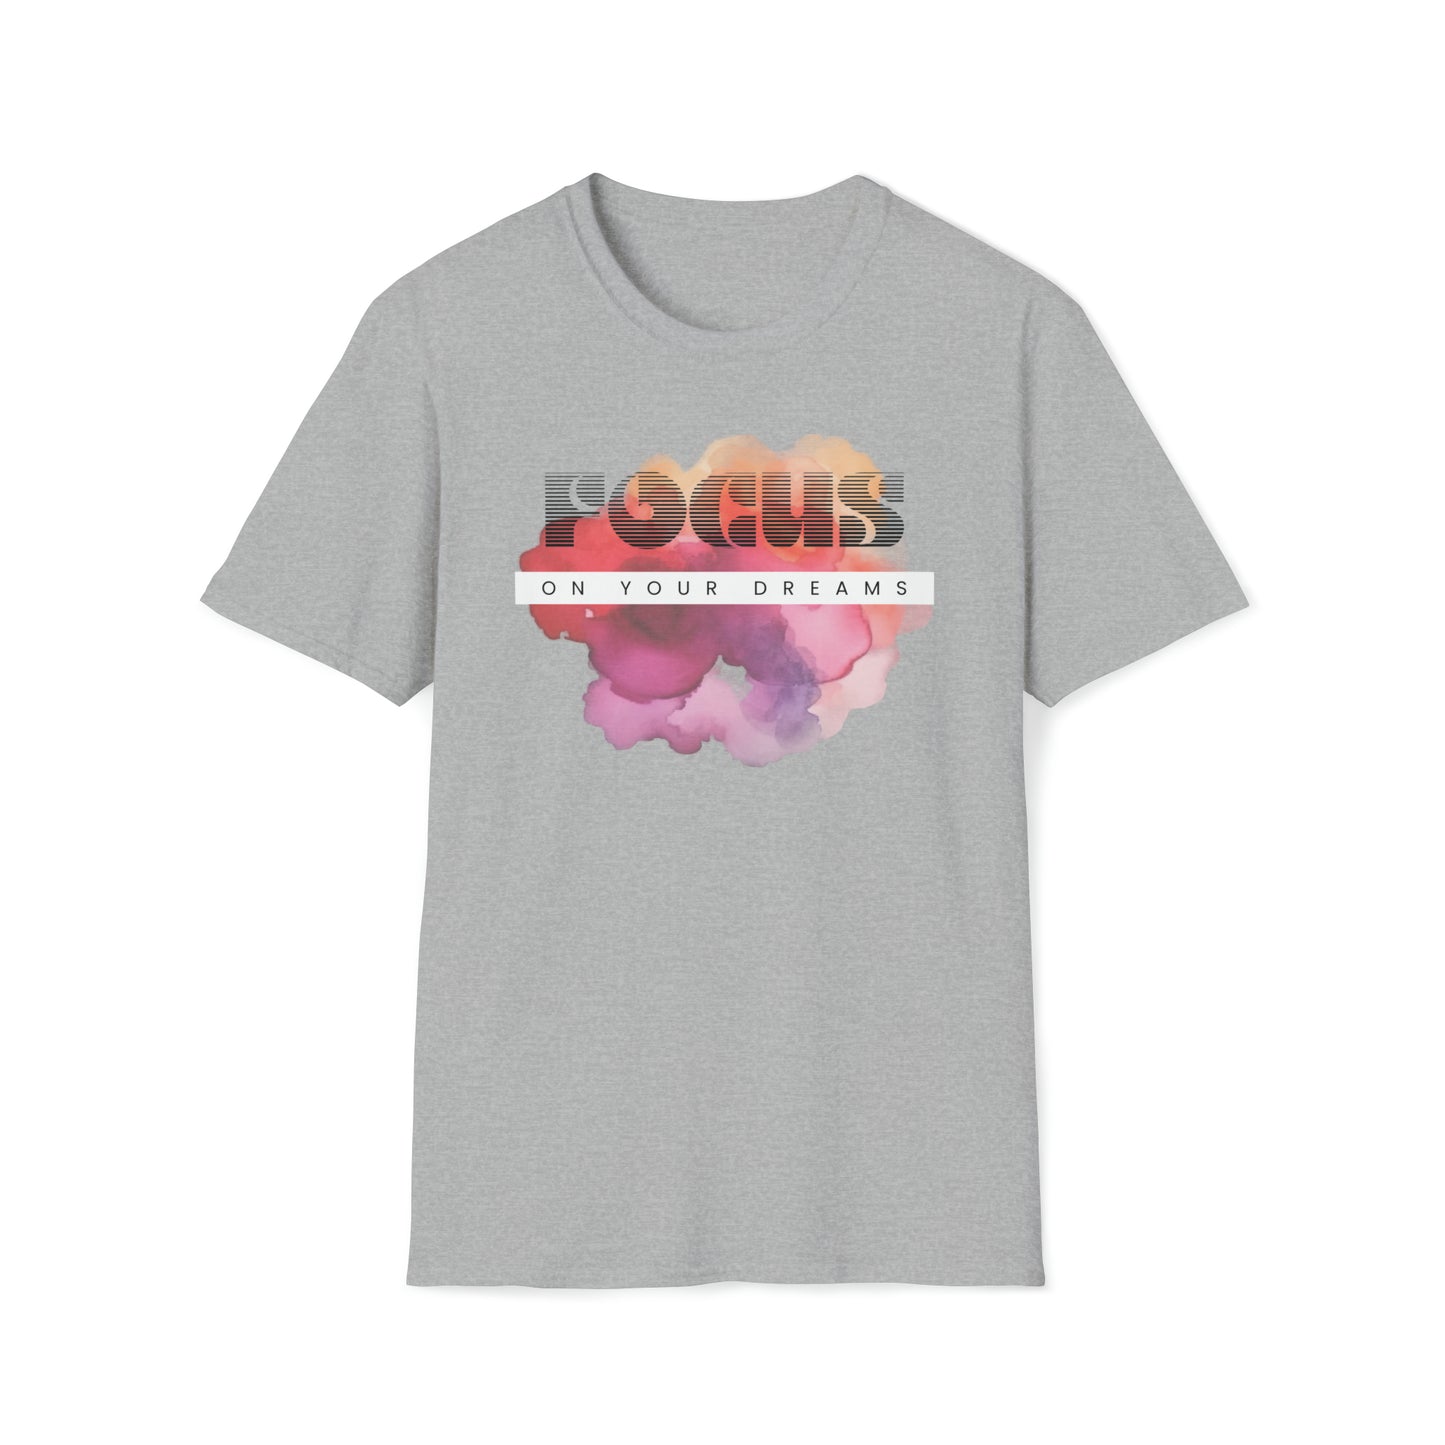 Focus on your dreams! Unisex Softstyle T-Shirt